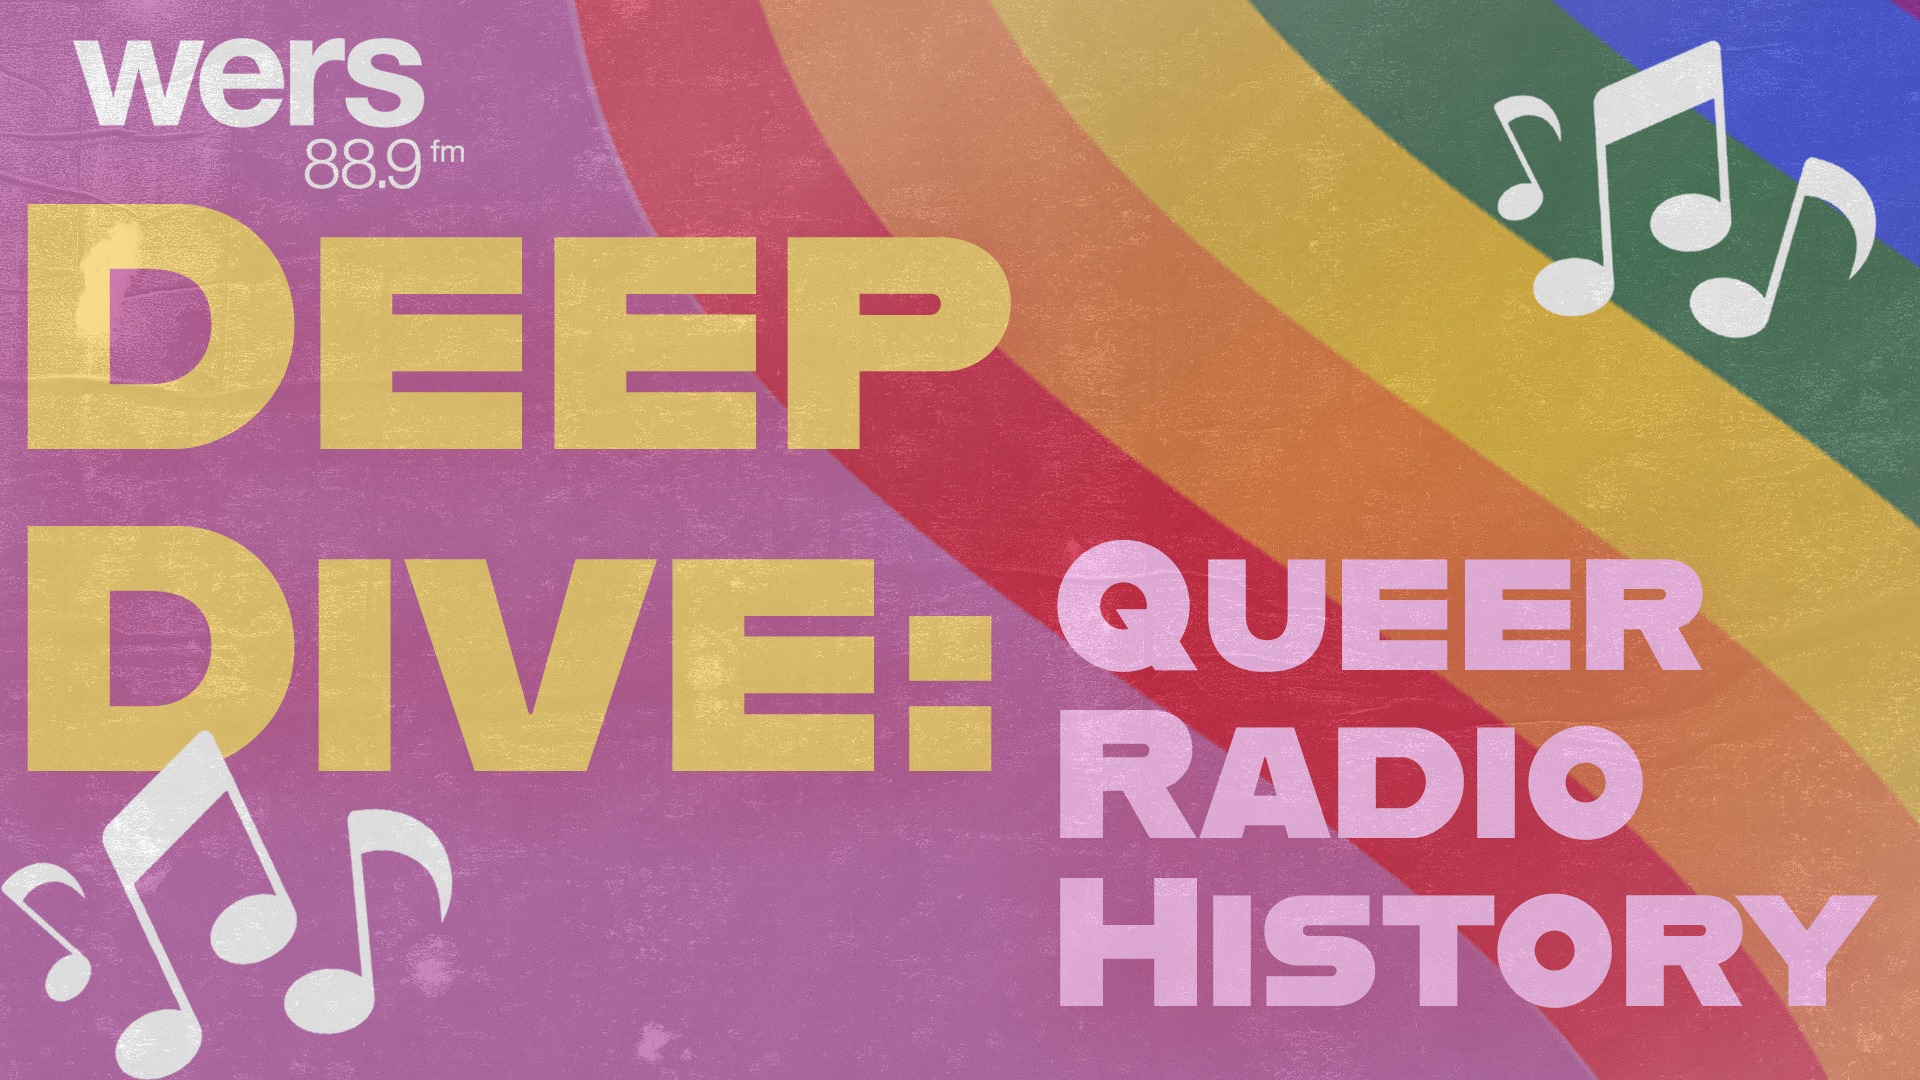 An illustration with a pink background with white music notes and a rainbow banner. Overlayed in yellow and white text are the words: "Deep Dive: Queer Radio History"